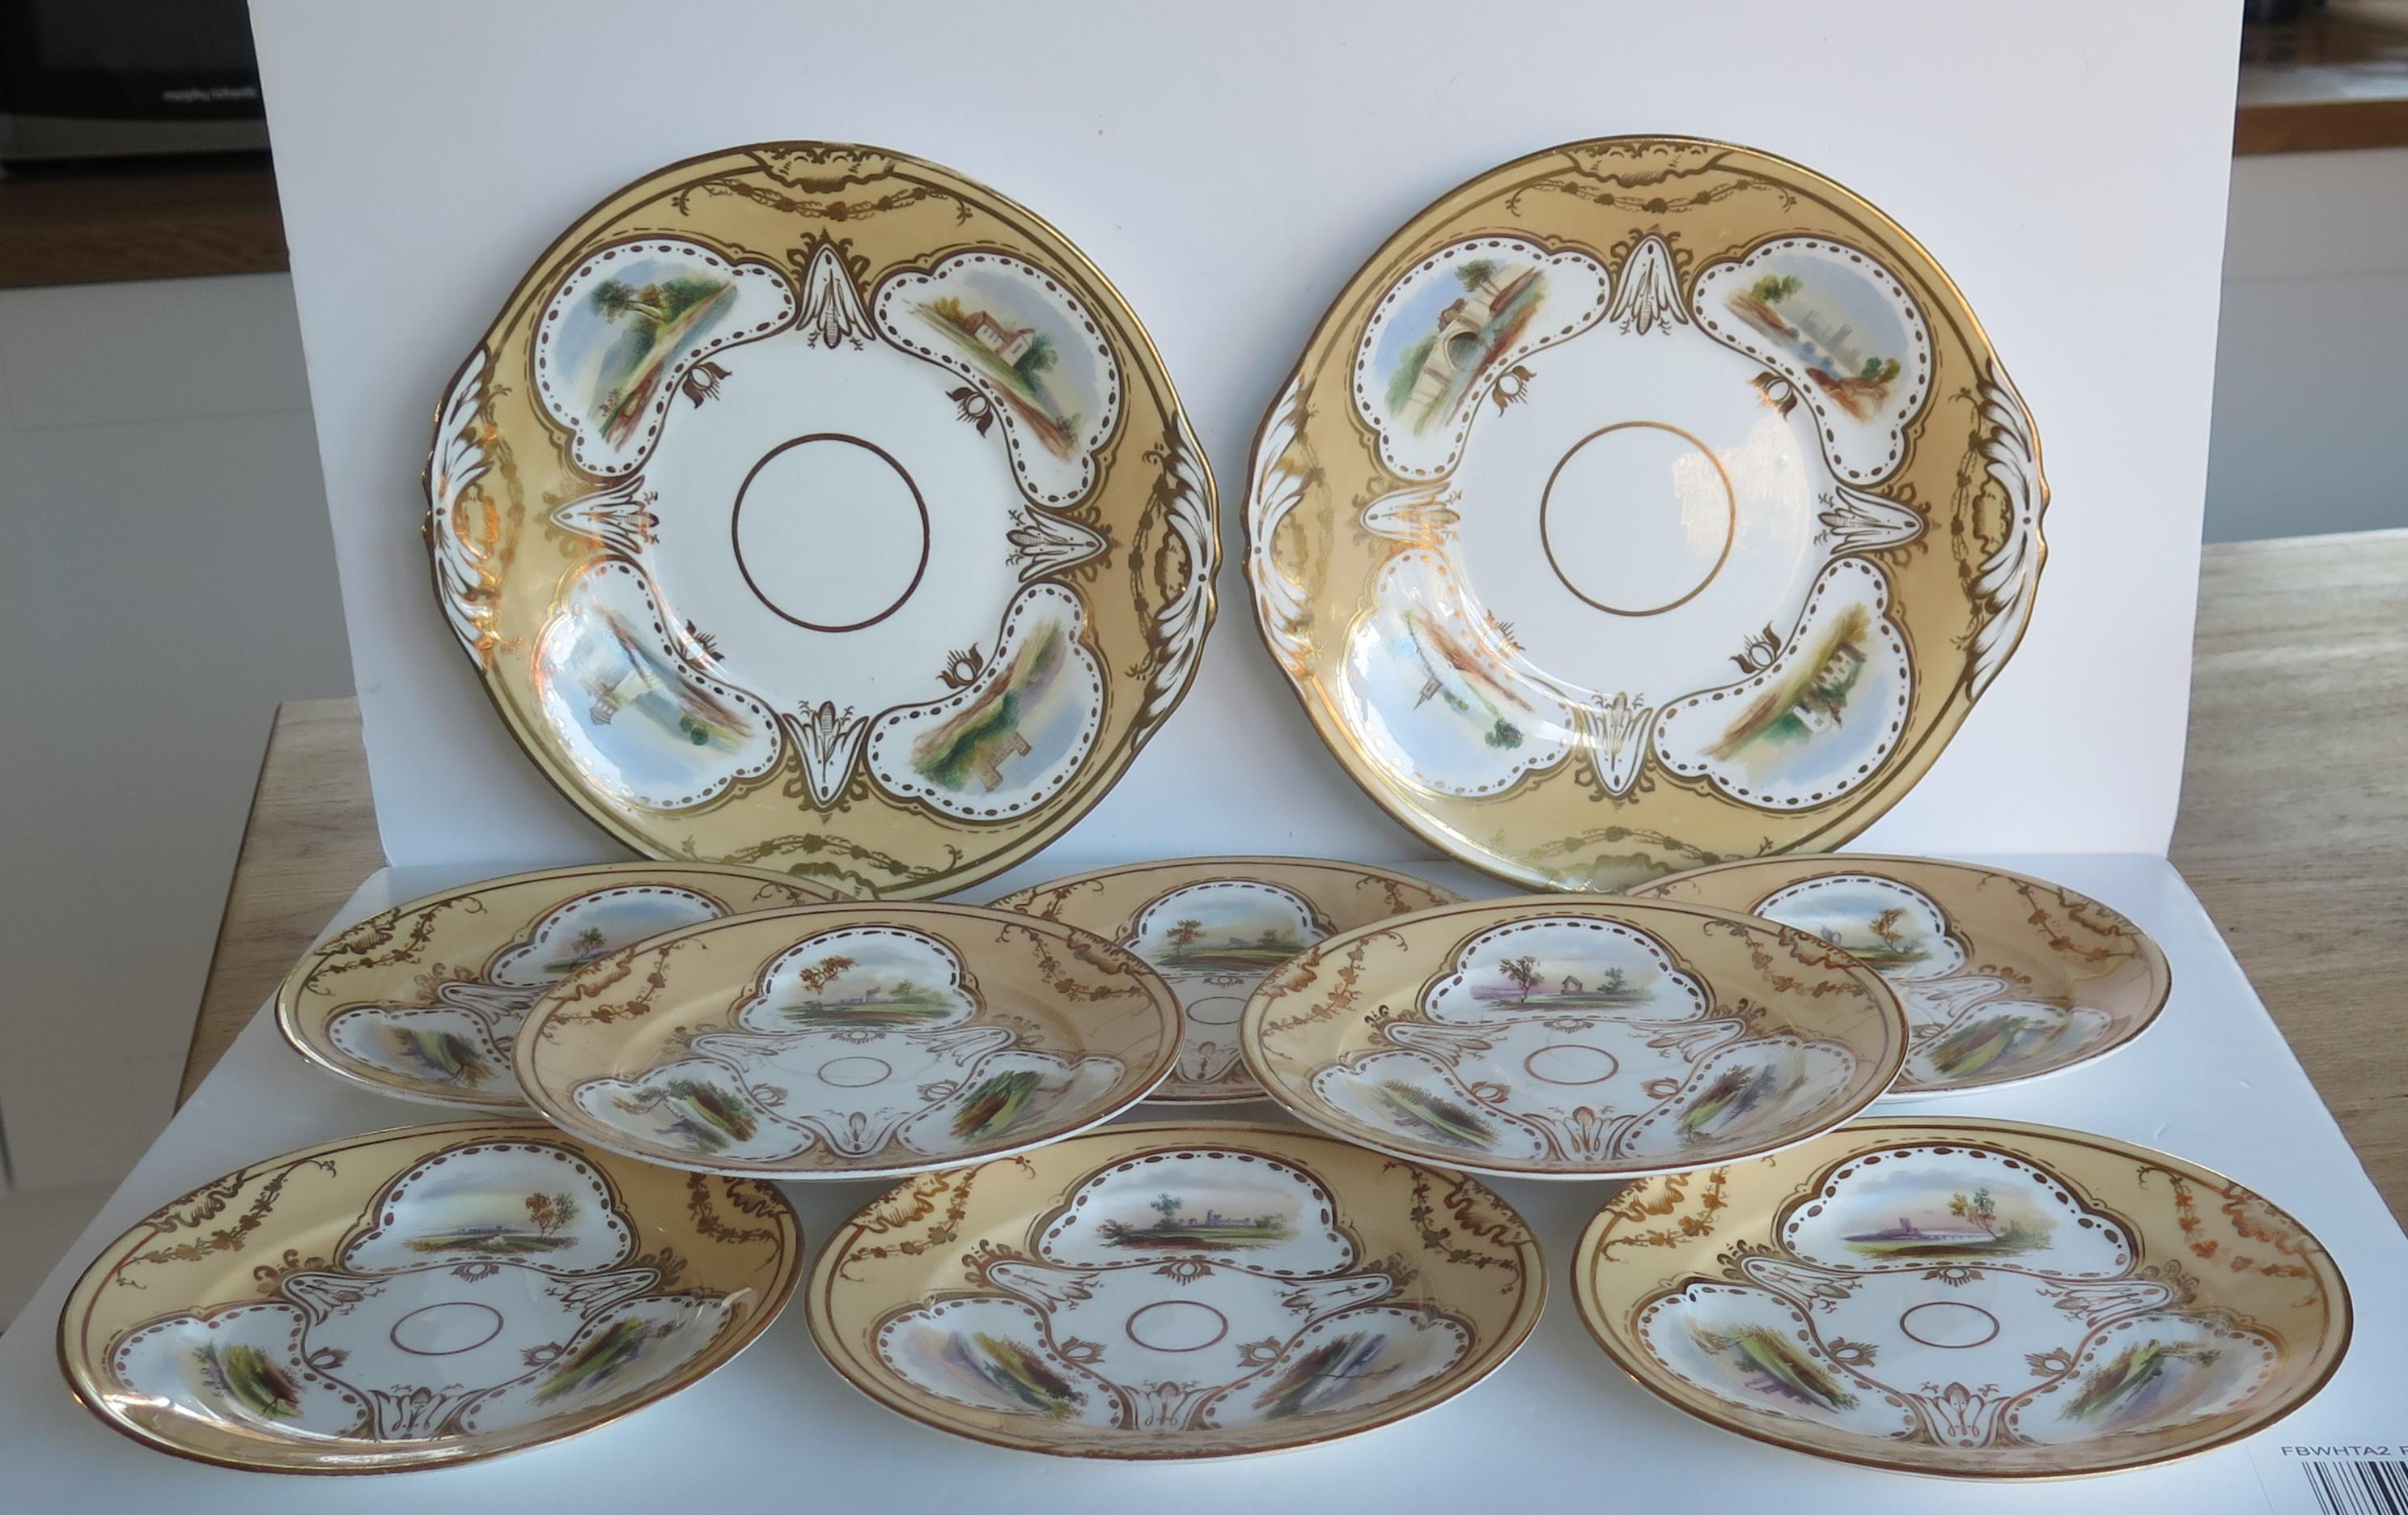 This is an early 19th century high quality porcelain Serving Set of two large serving plates plus 8 matching side plates, all hand painted with different scenes, which we attribute to Rockingham or another quality Staffordshire, English pottery and